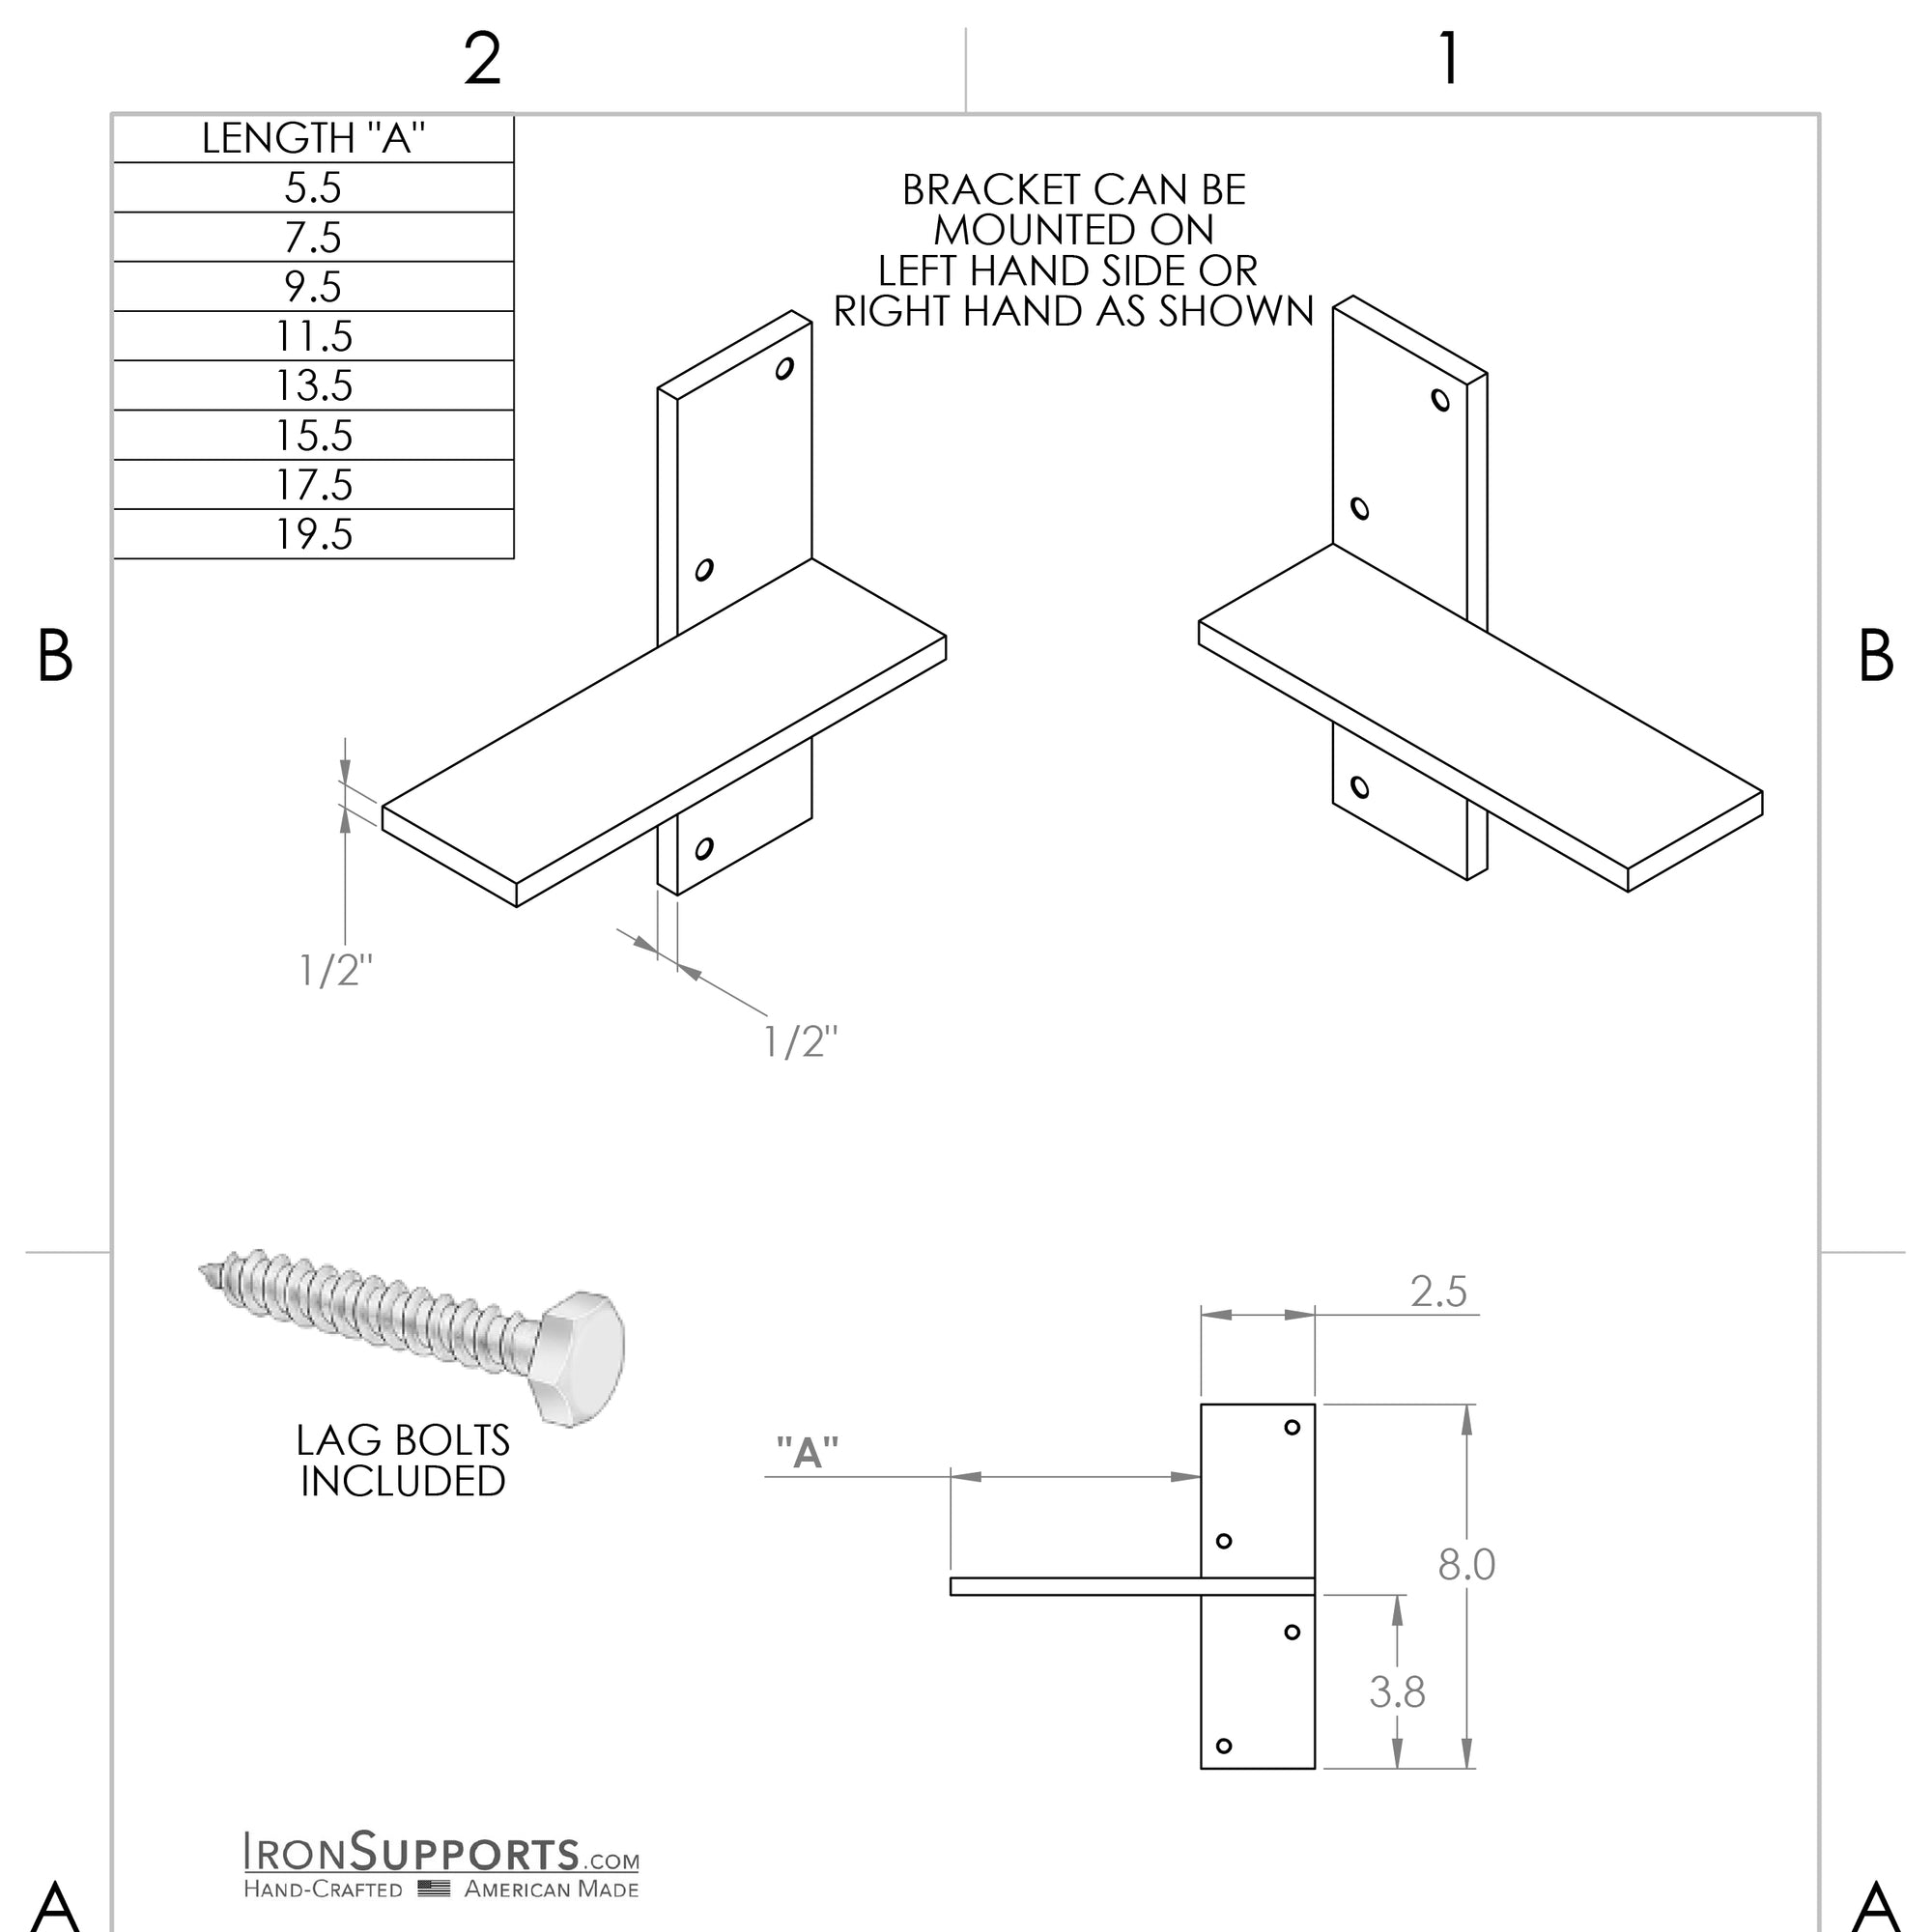 Engineered drawing of the Floating Countertop Wall Bracket. Provides detailed specifications for installation and support.